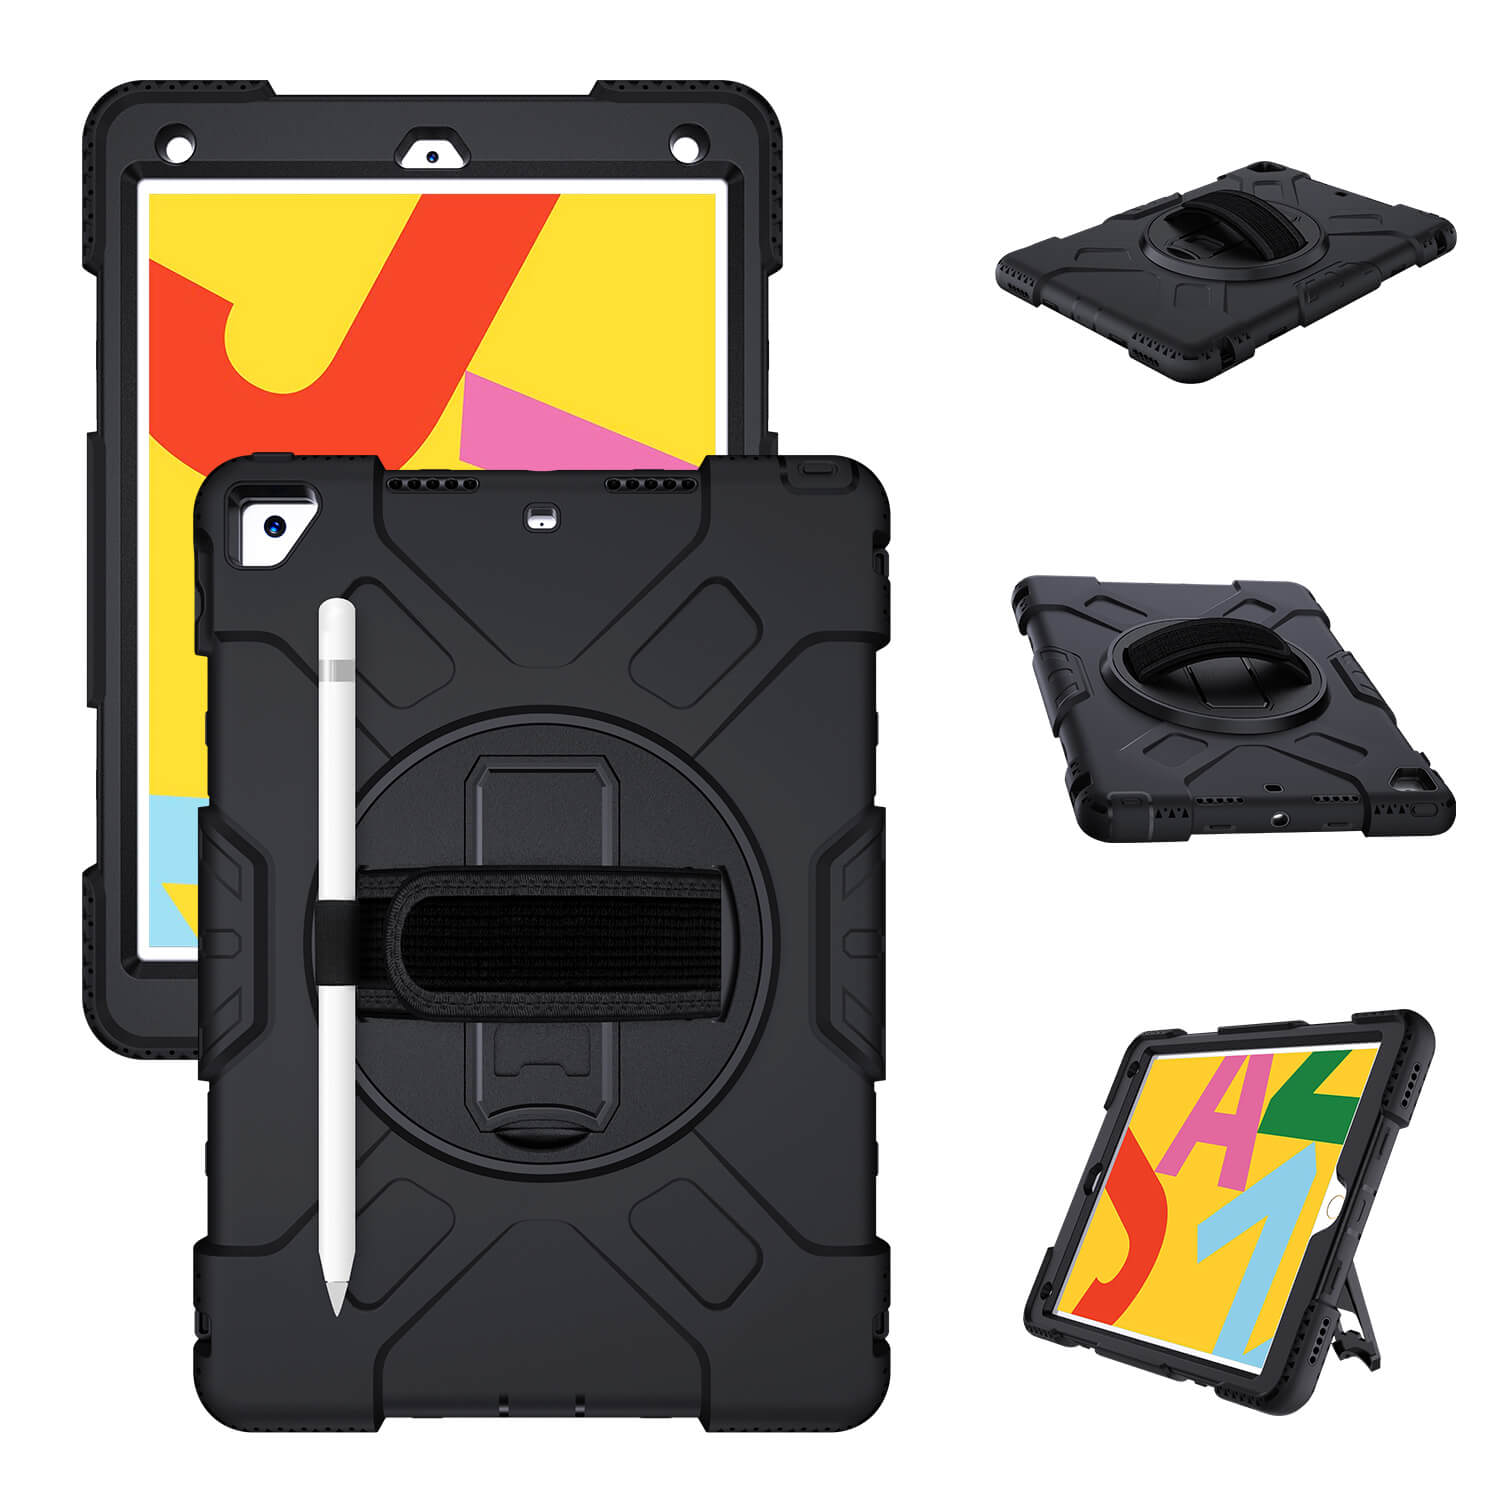 Tough On iPad Pro 10.5" Case Rugged Protection